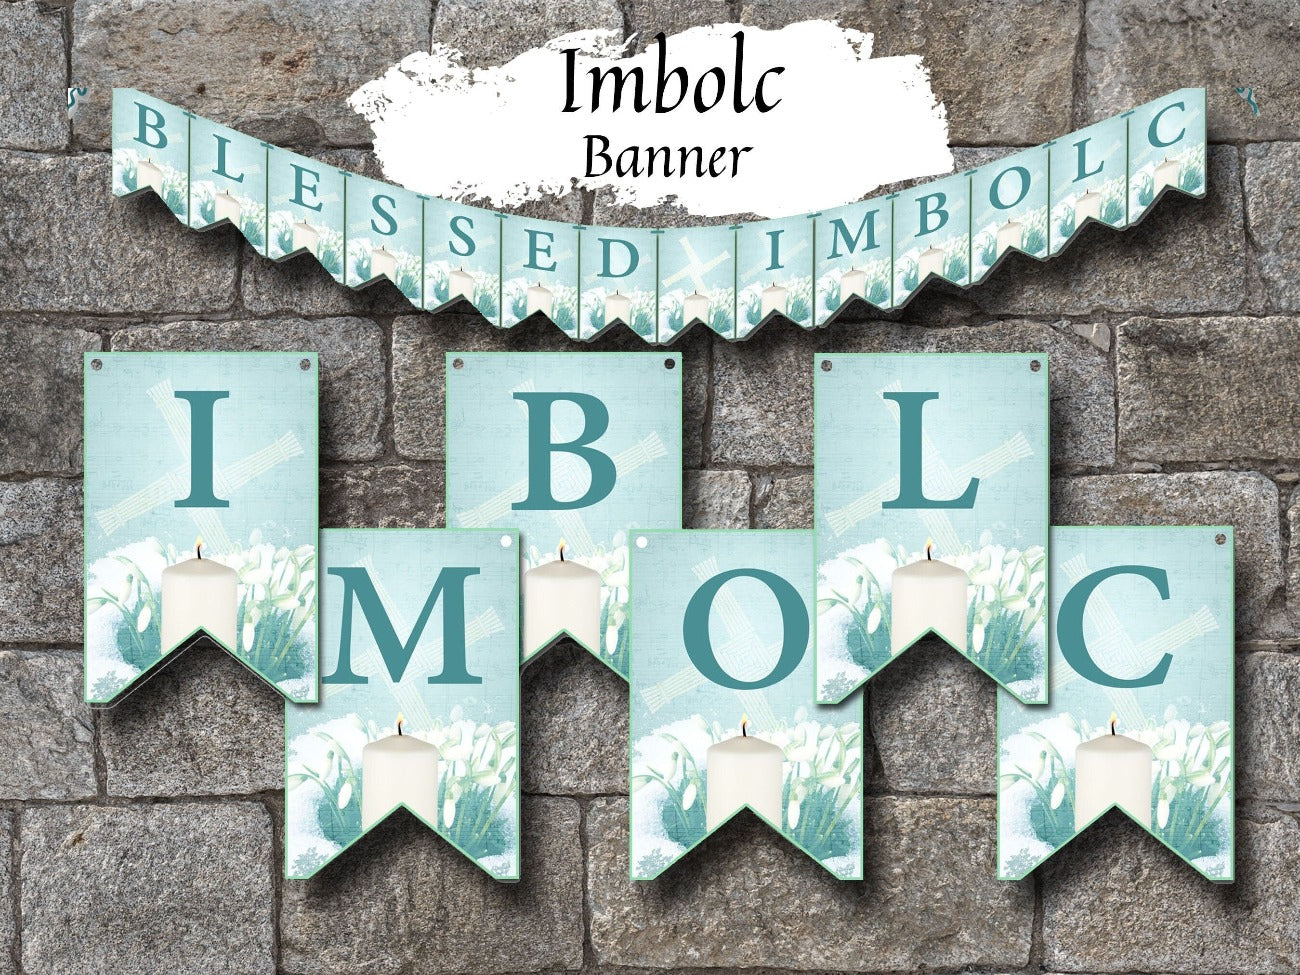 IMBOLC BANNER Bunting, Flags Decoration, Blessed Imbolc Banner, Imbolc Altar Flags, Candlemas Bunting, Printable DIY Wicca Sabbat Craft - Morgana Magick Spell